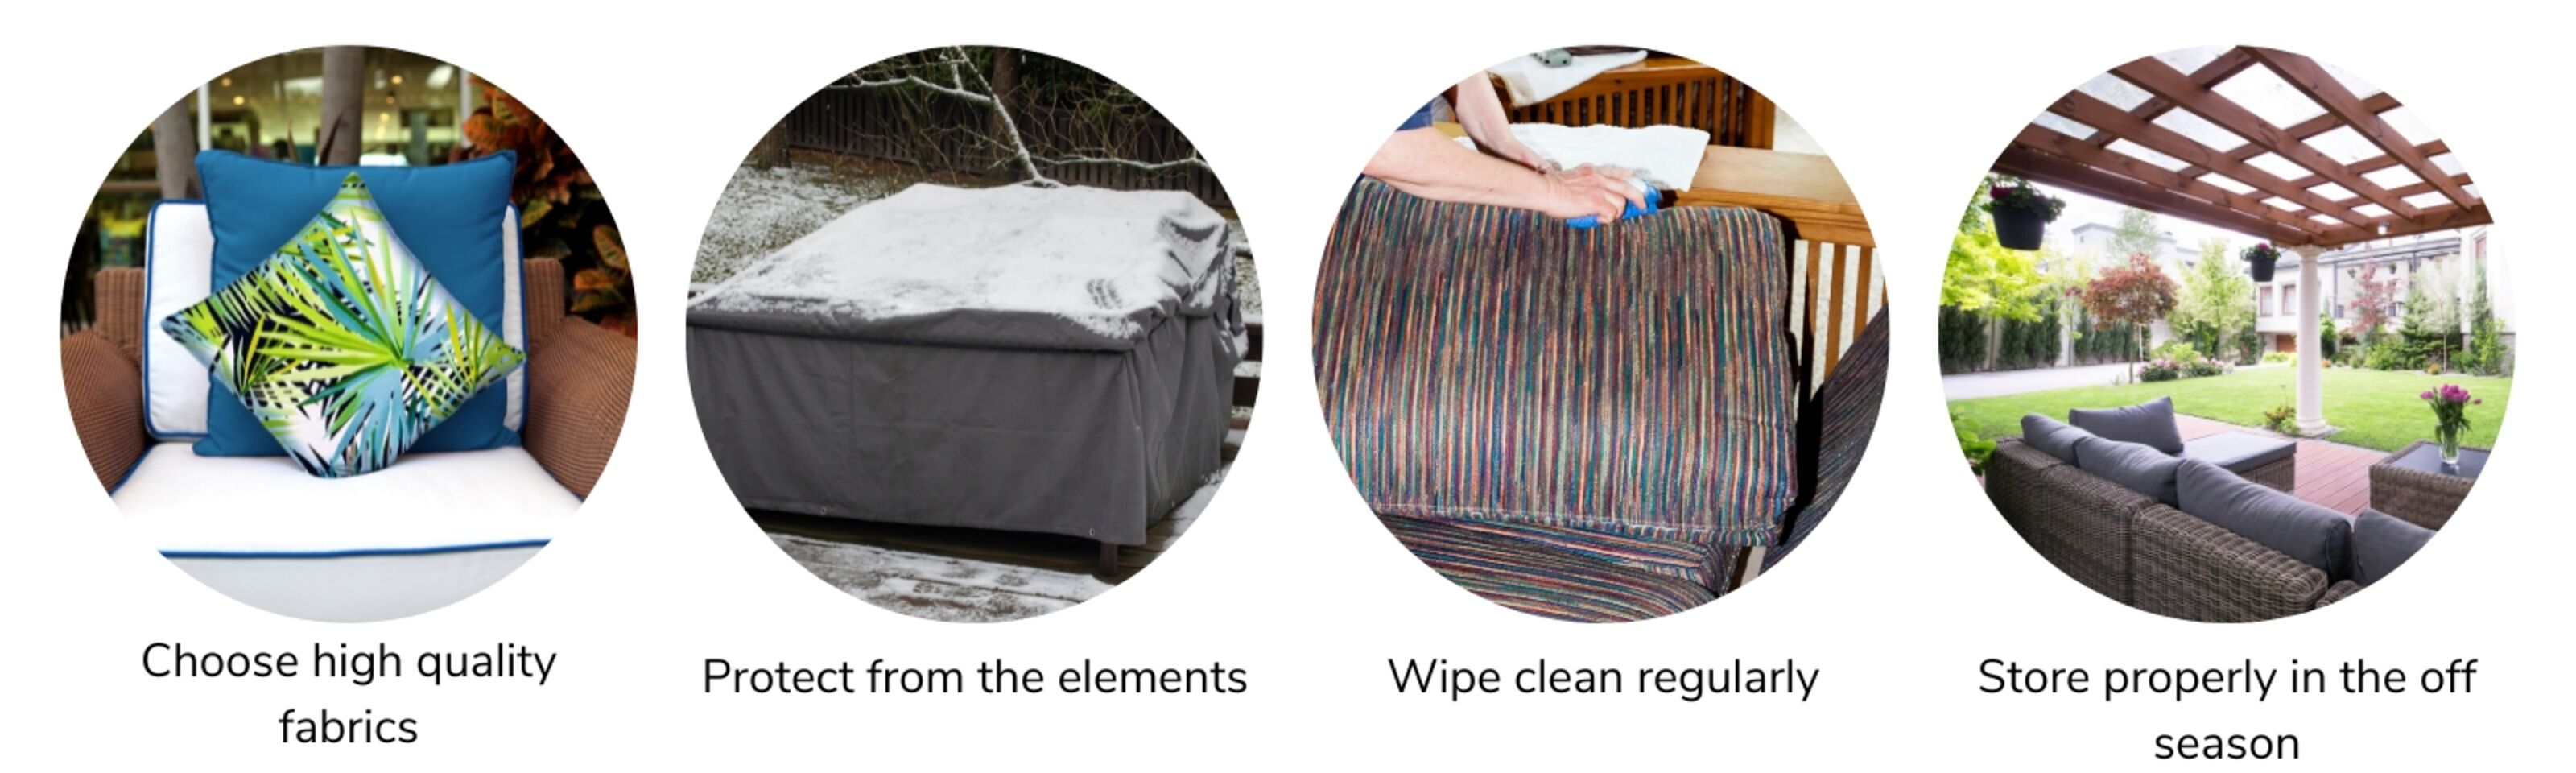 Care_Outdoor_Fabric_Blog_Tips